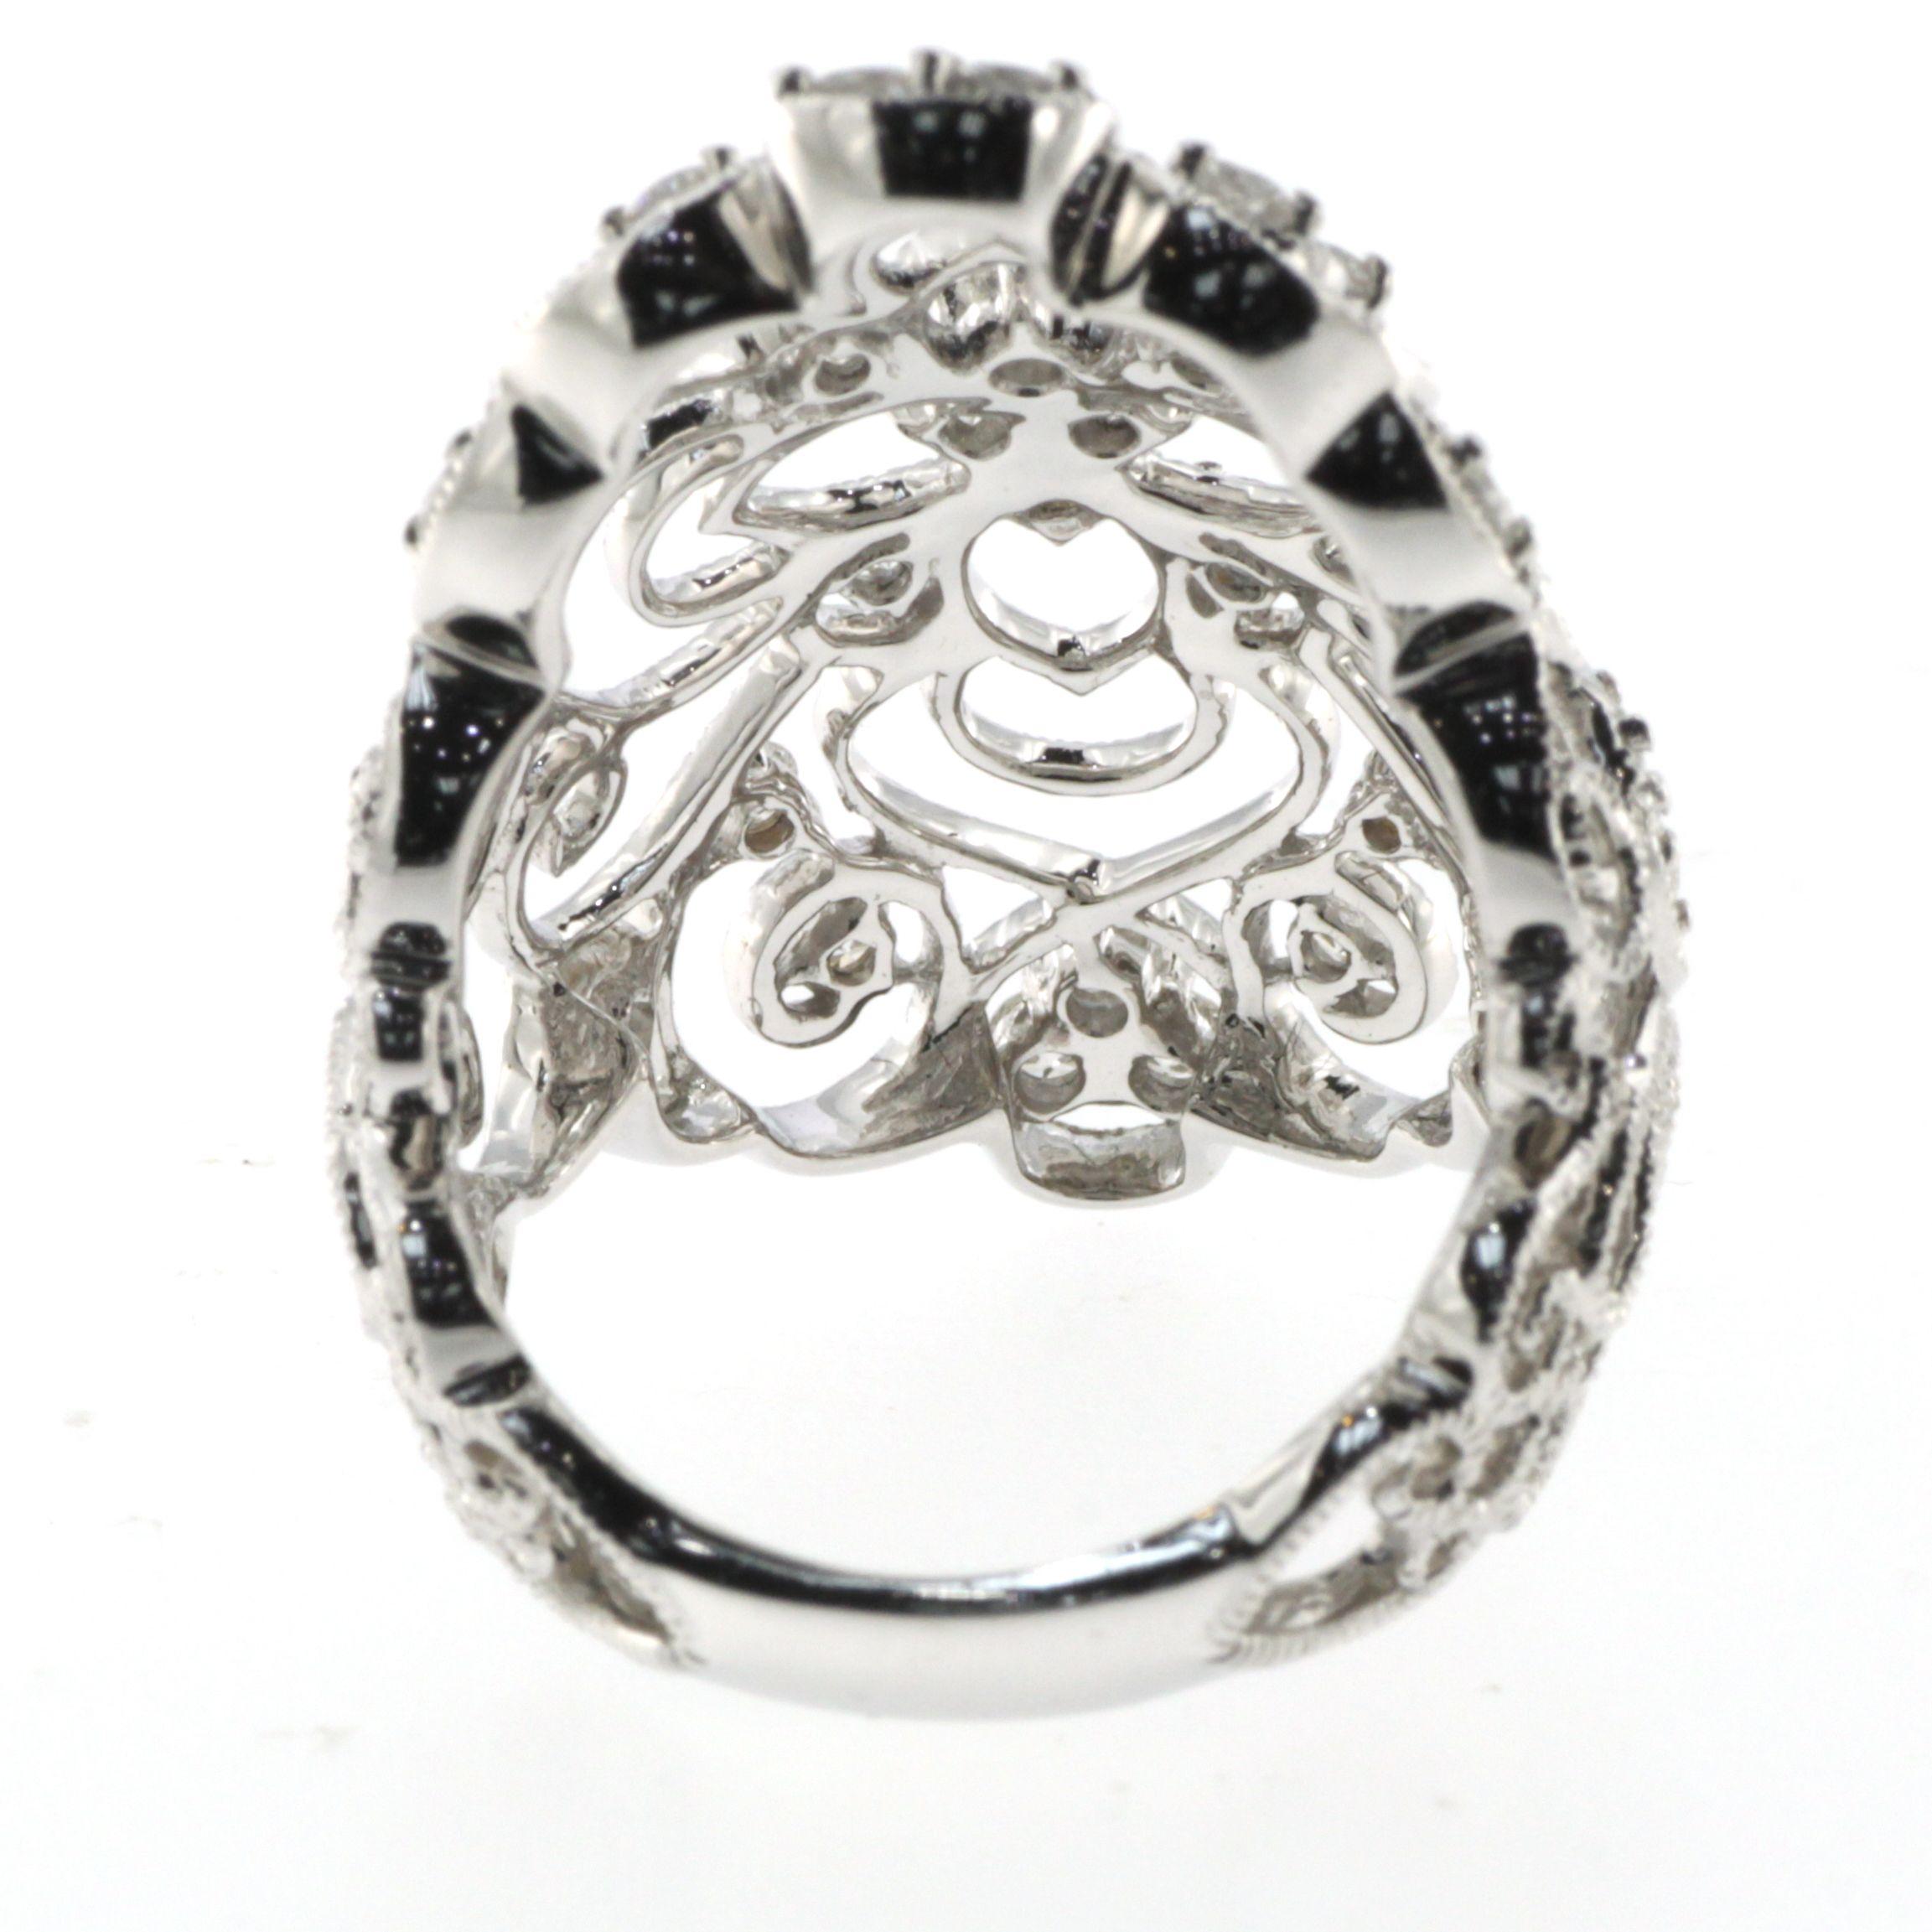 Art Decor Antique Filigree 1.28 Carat Diamond Ring in 18 Karat White Gold In New Condition For Sale In Hong Kong, HK